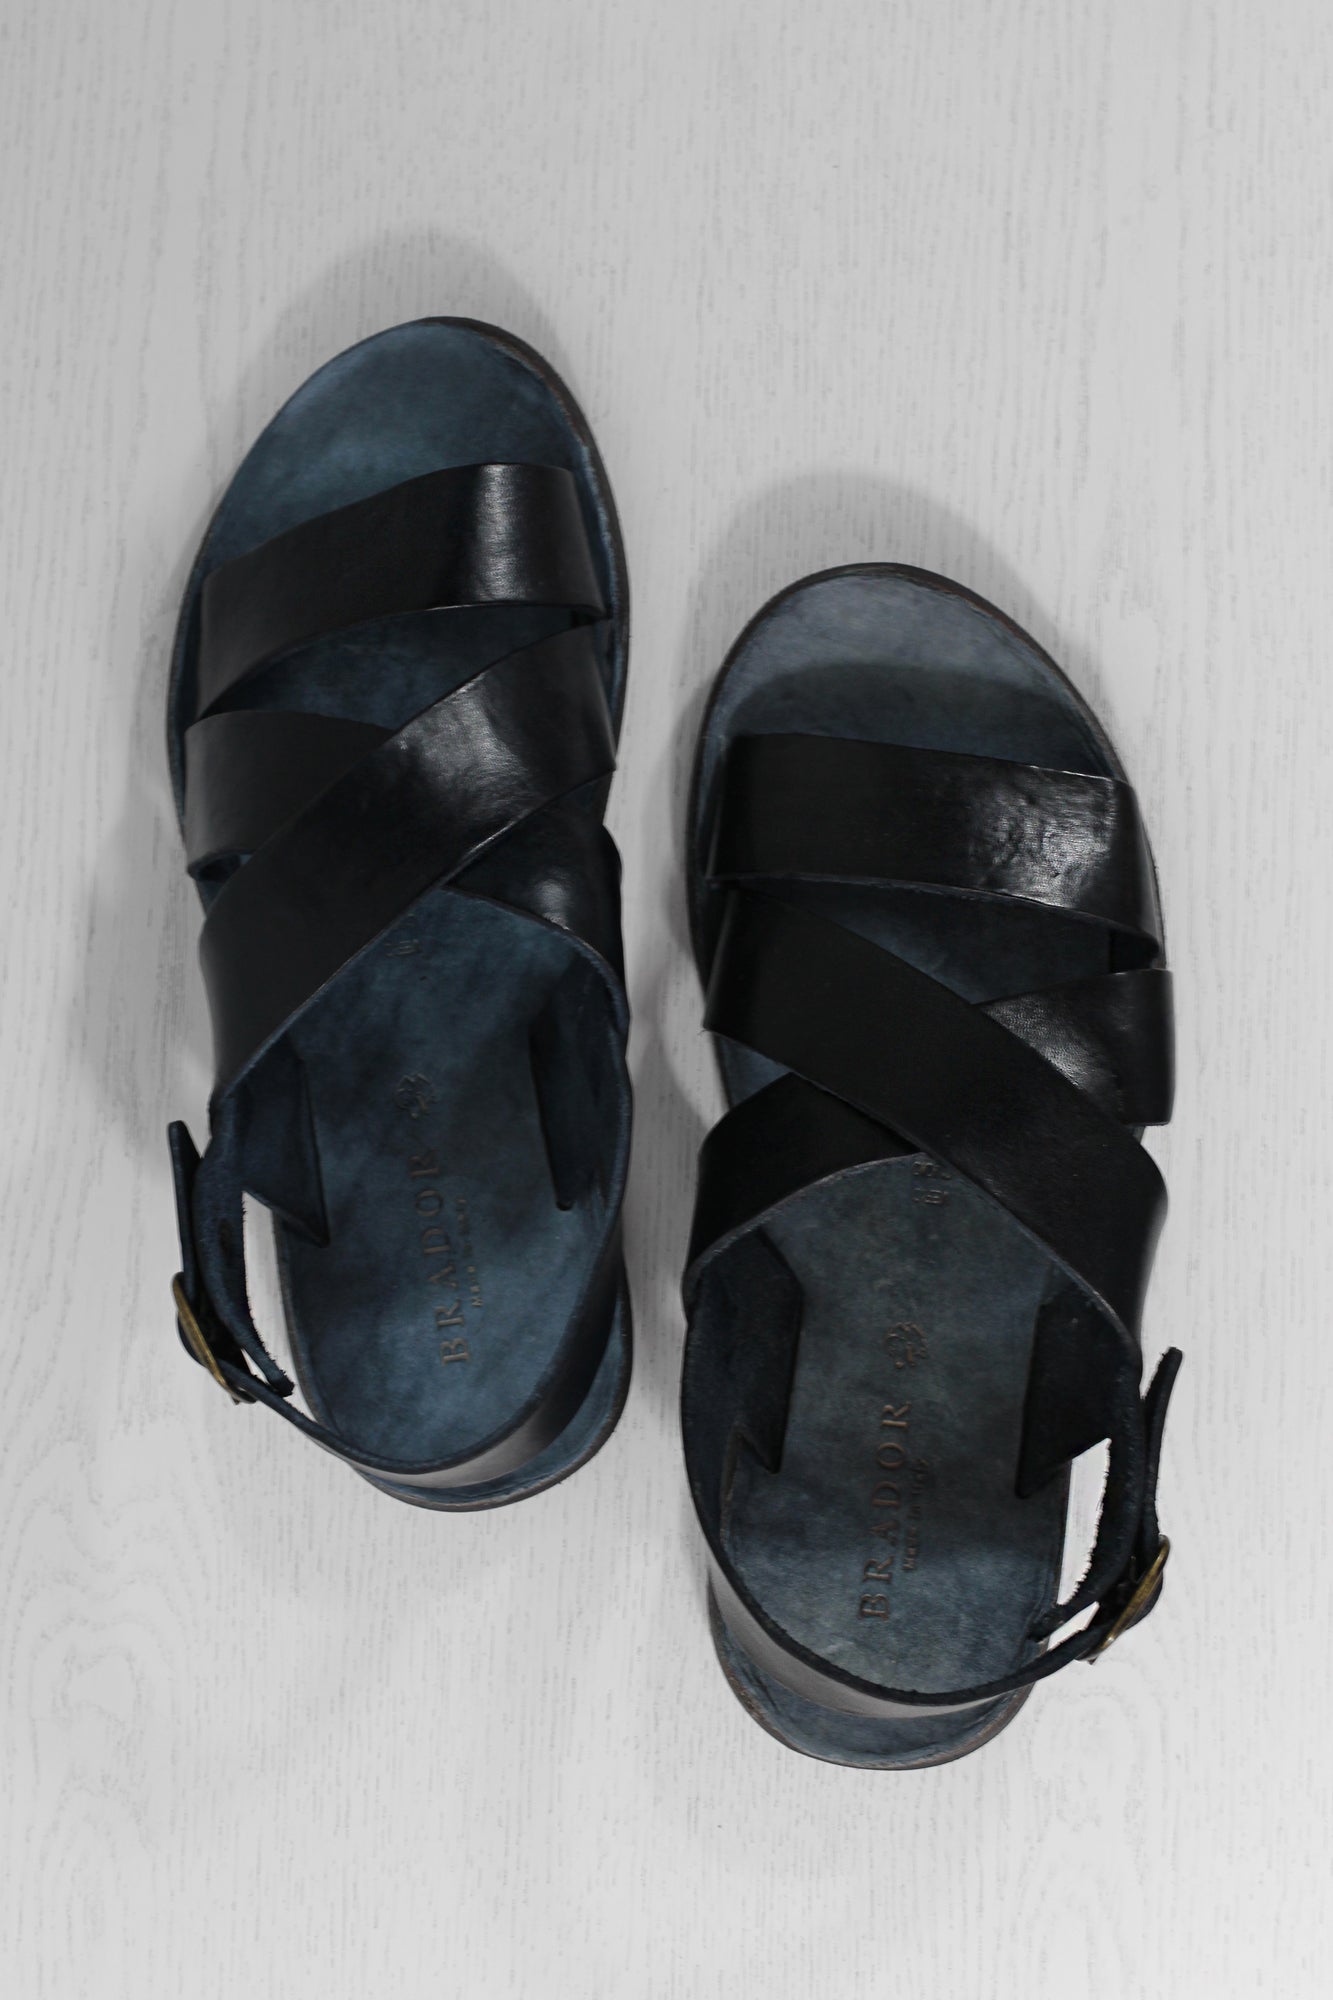 WOMENS ROME BLACK LEATHER SANDALS